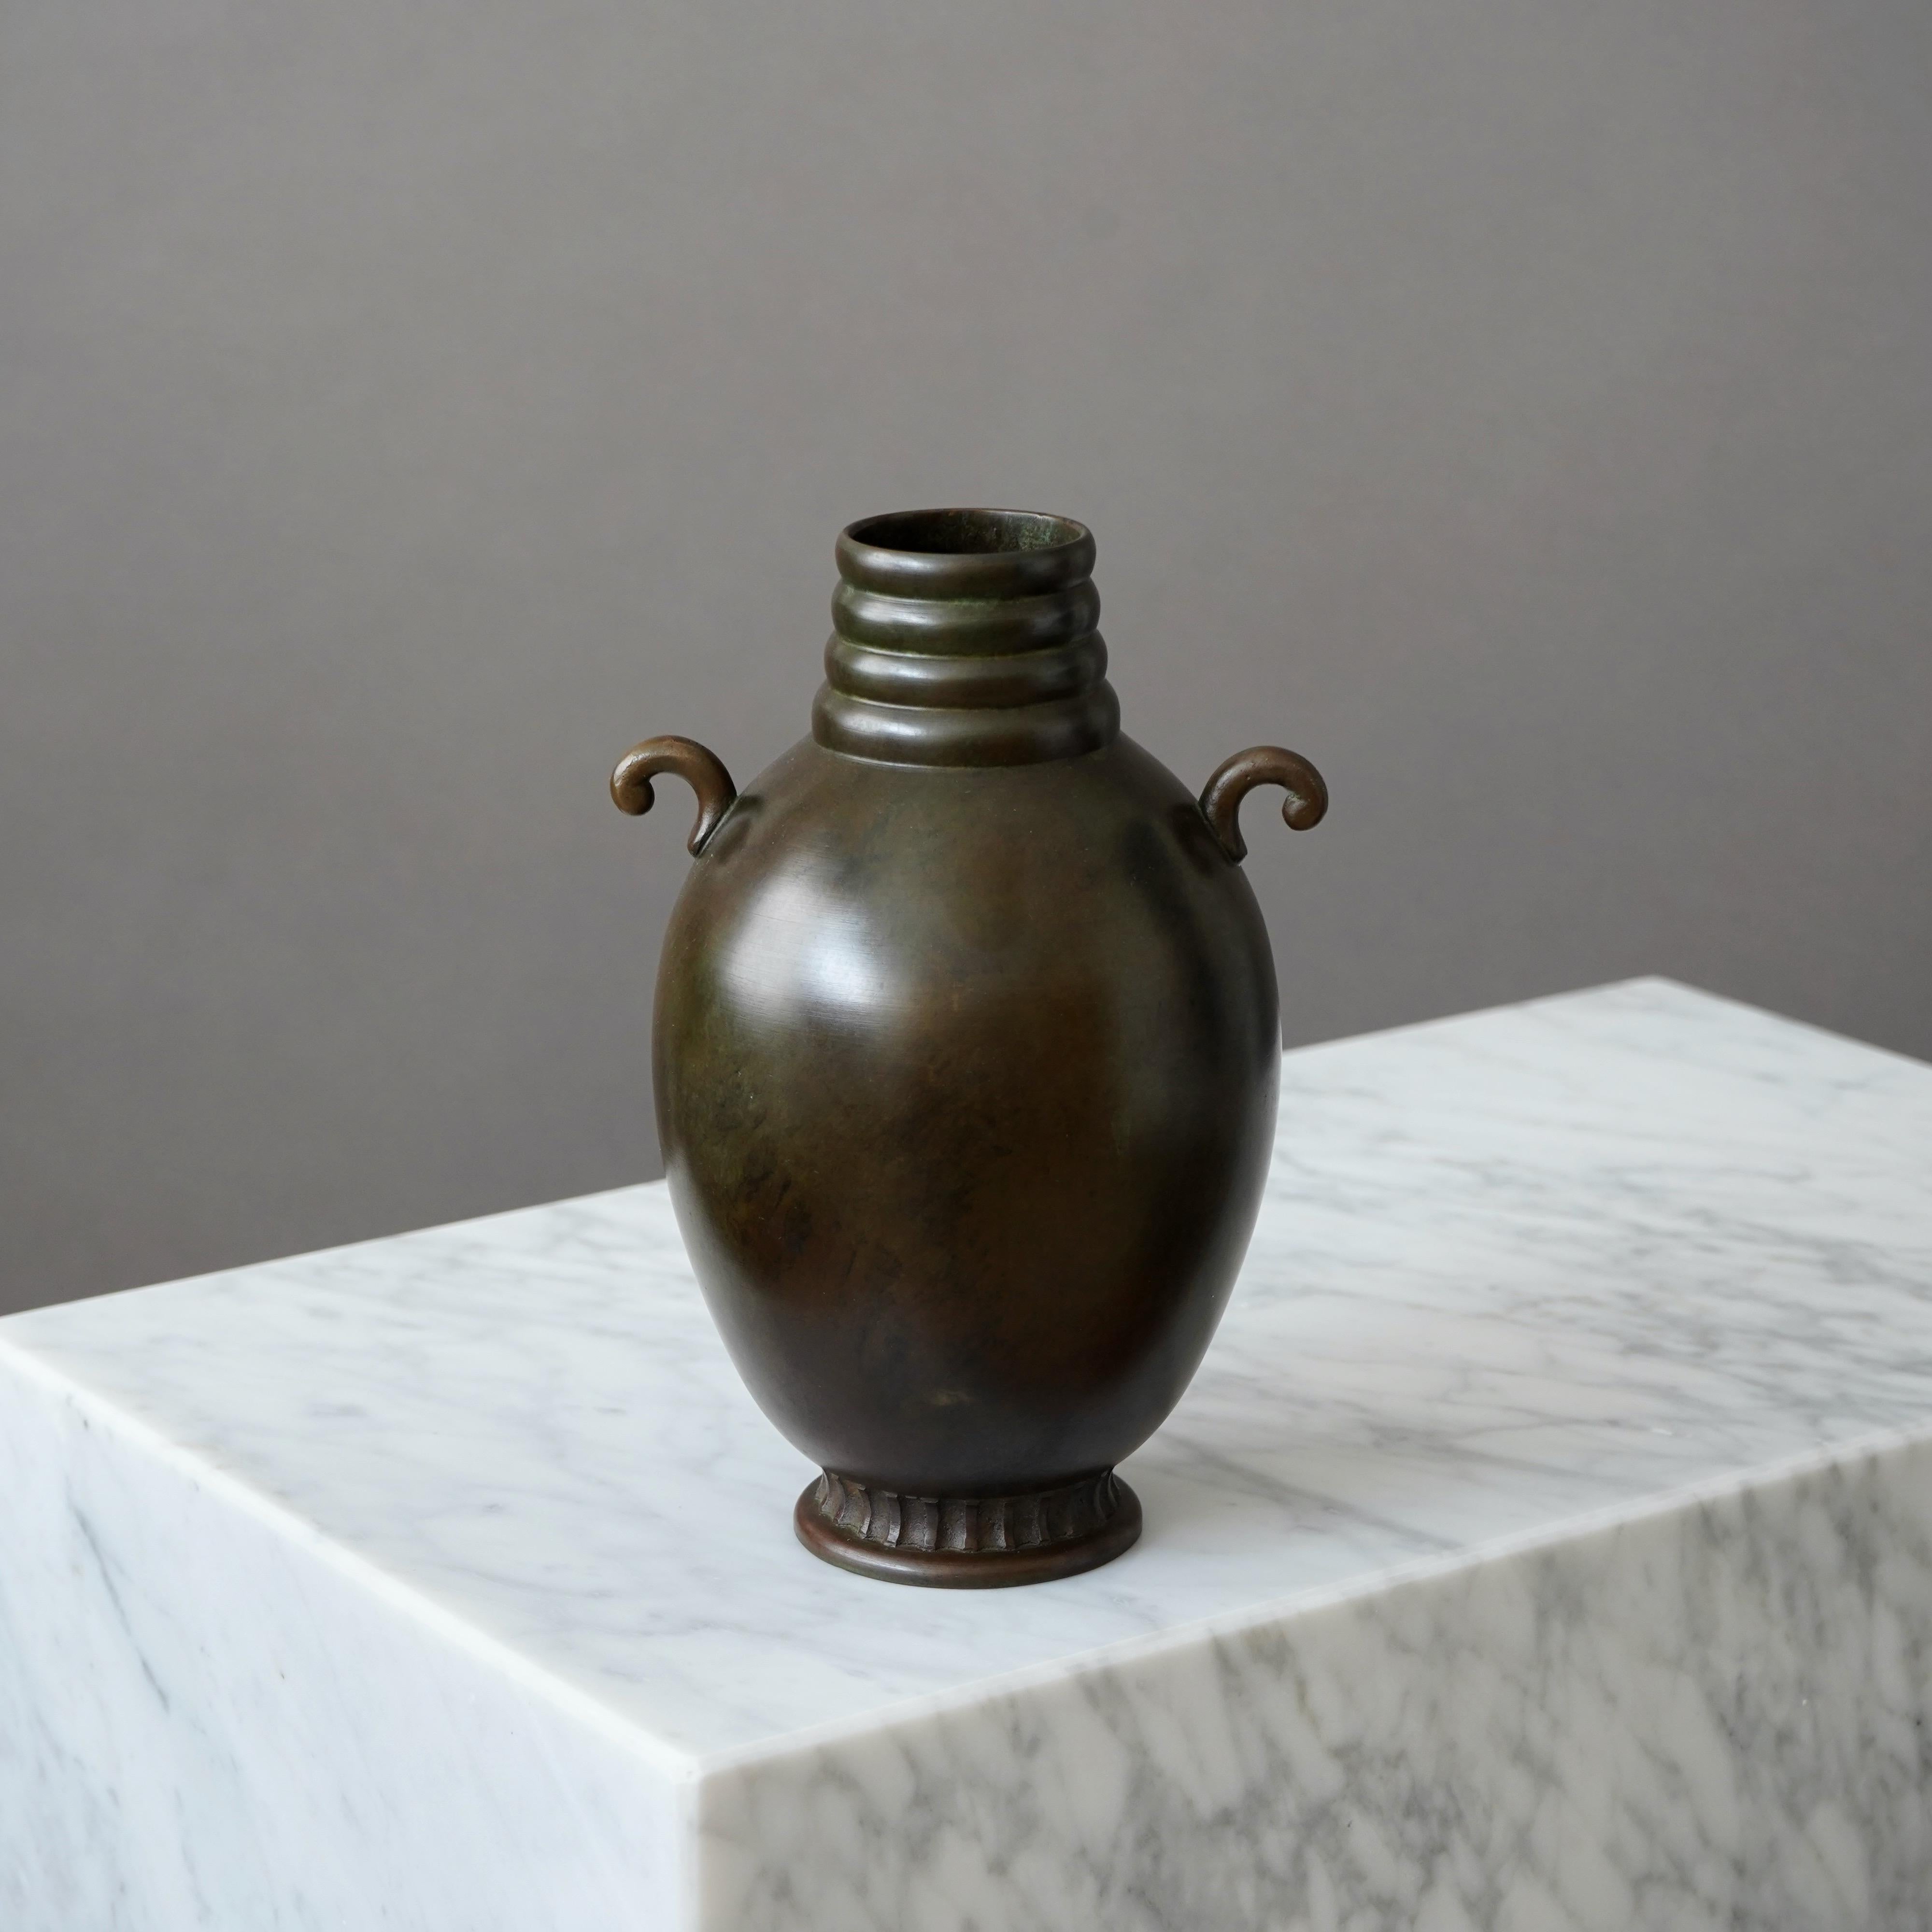 A beautiful bronze vase with amazing patina. 
Made by GAB Guldsmedsaktiebolaget, Sweden, 1930s.  

Excellent condition.
Stamped 'BRONS' and makers mark.